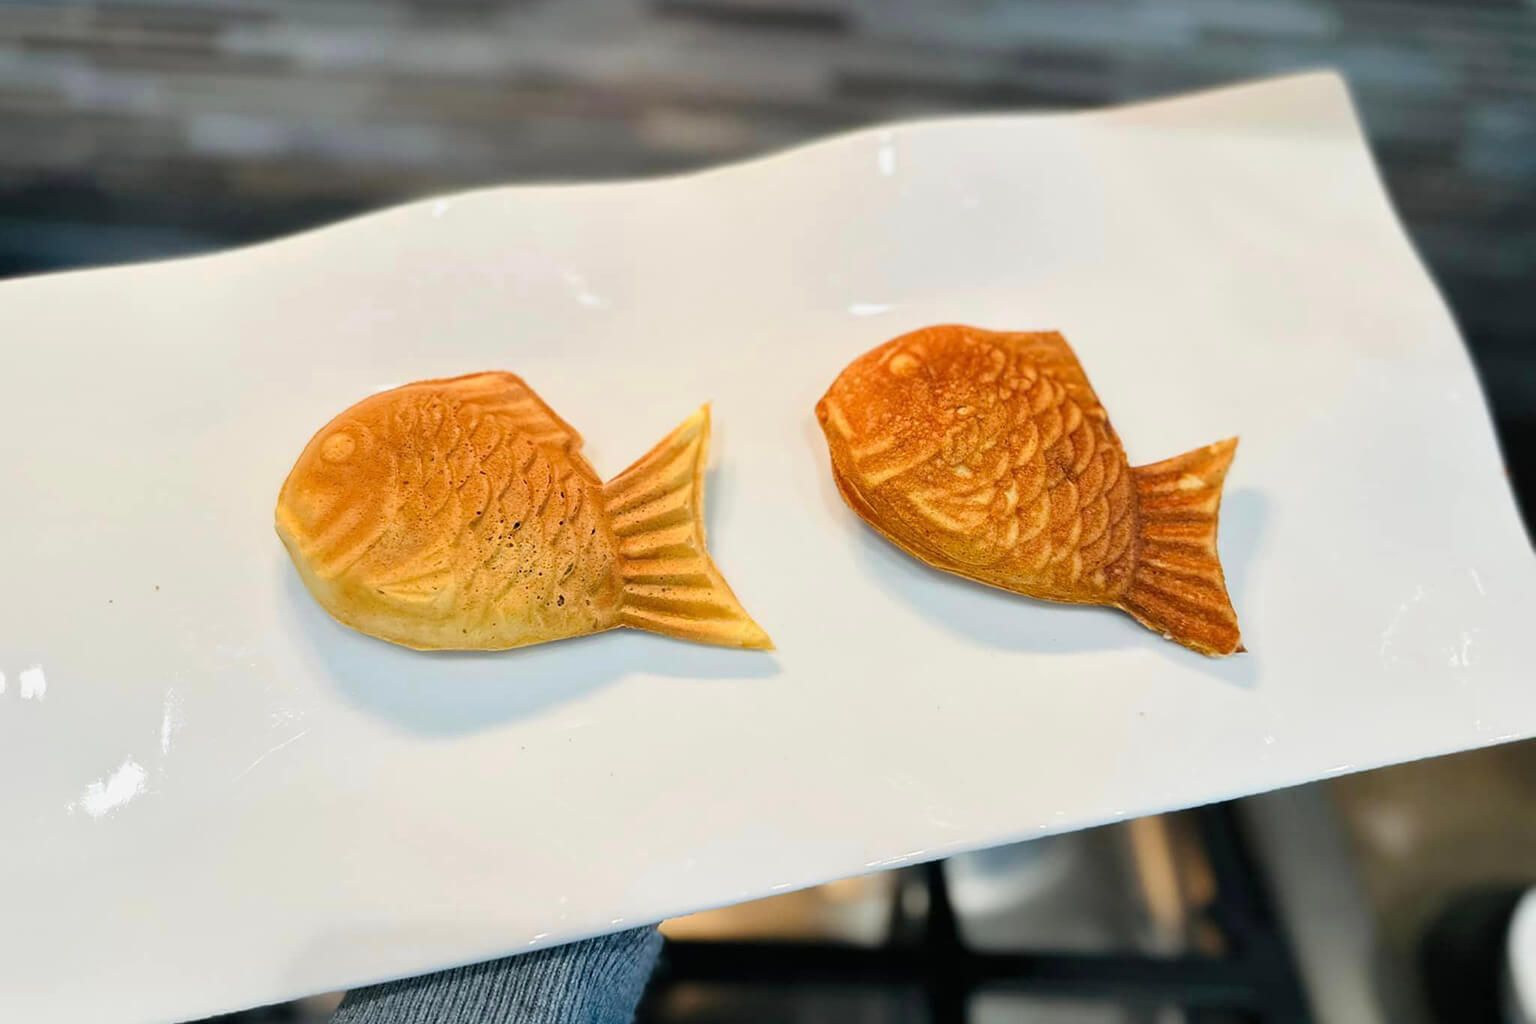 A New Taiyaki Recipe: Gluten-free, Grain-free, and Low Carb - eyes and hour